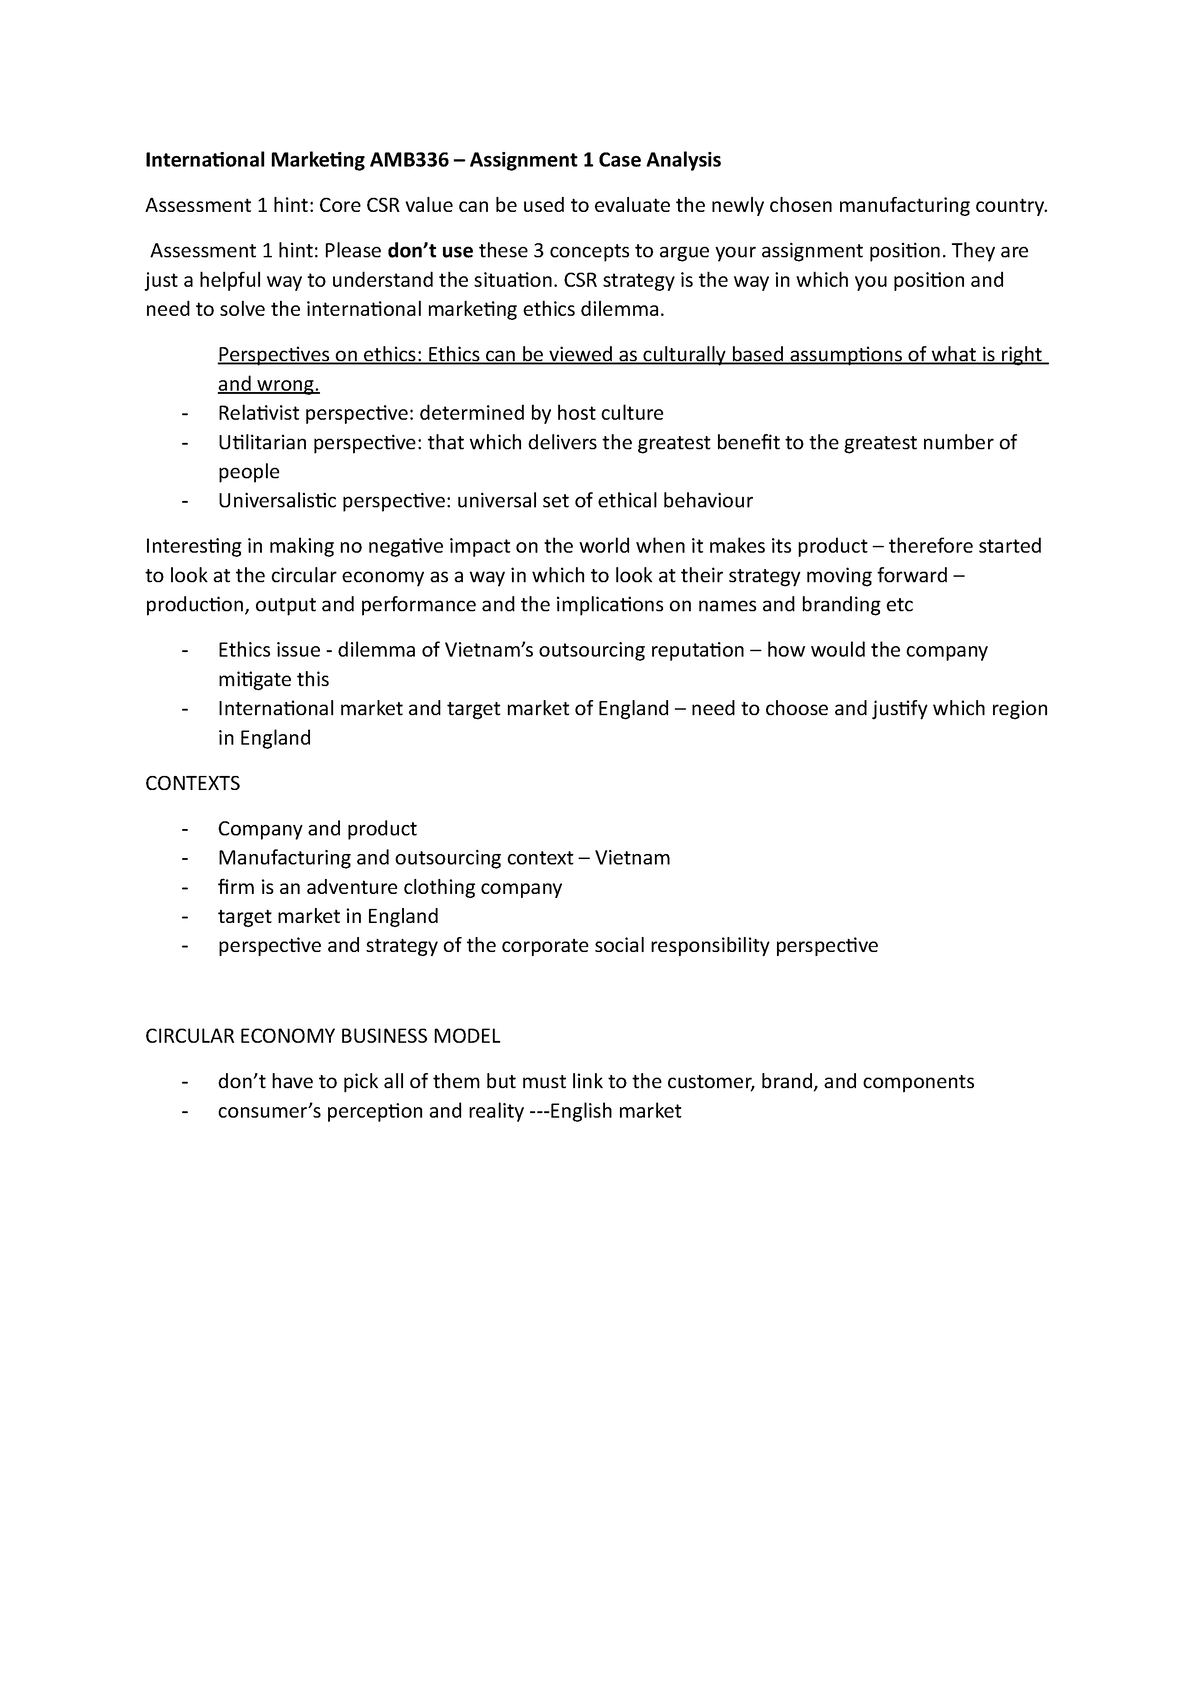 Case analysis outline - International Marketing AMB336 – Assignment 1 ...